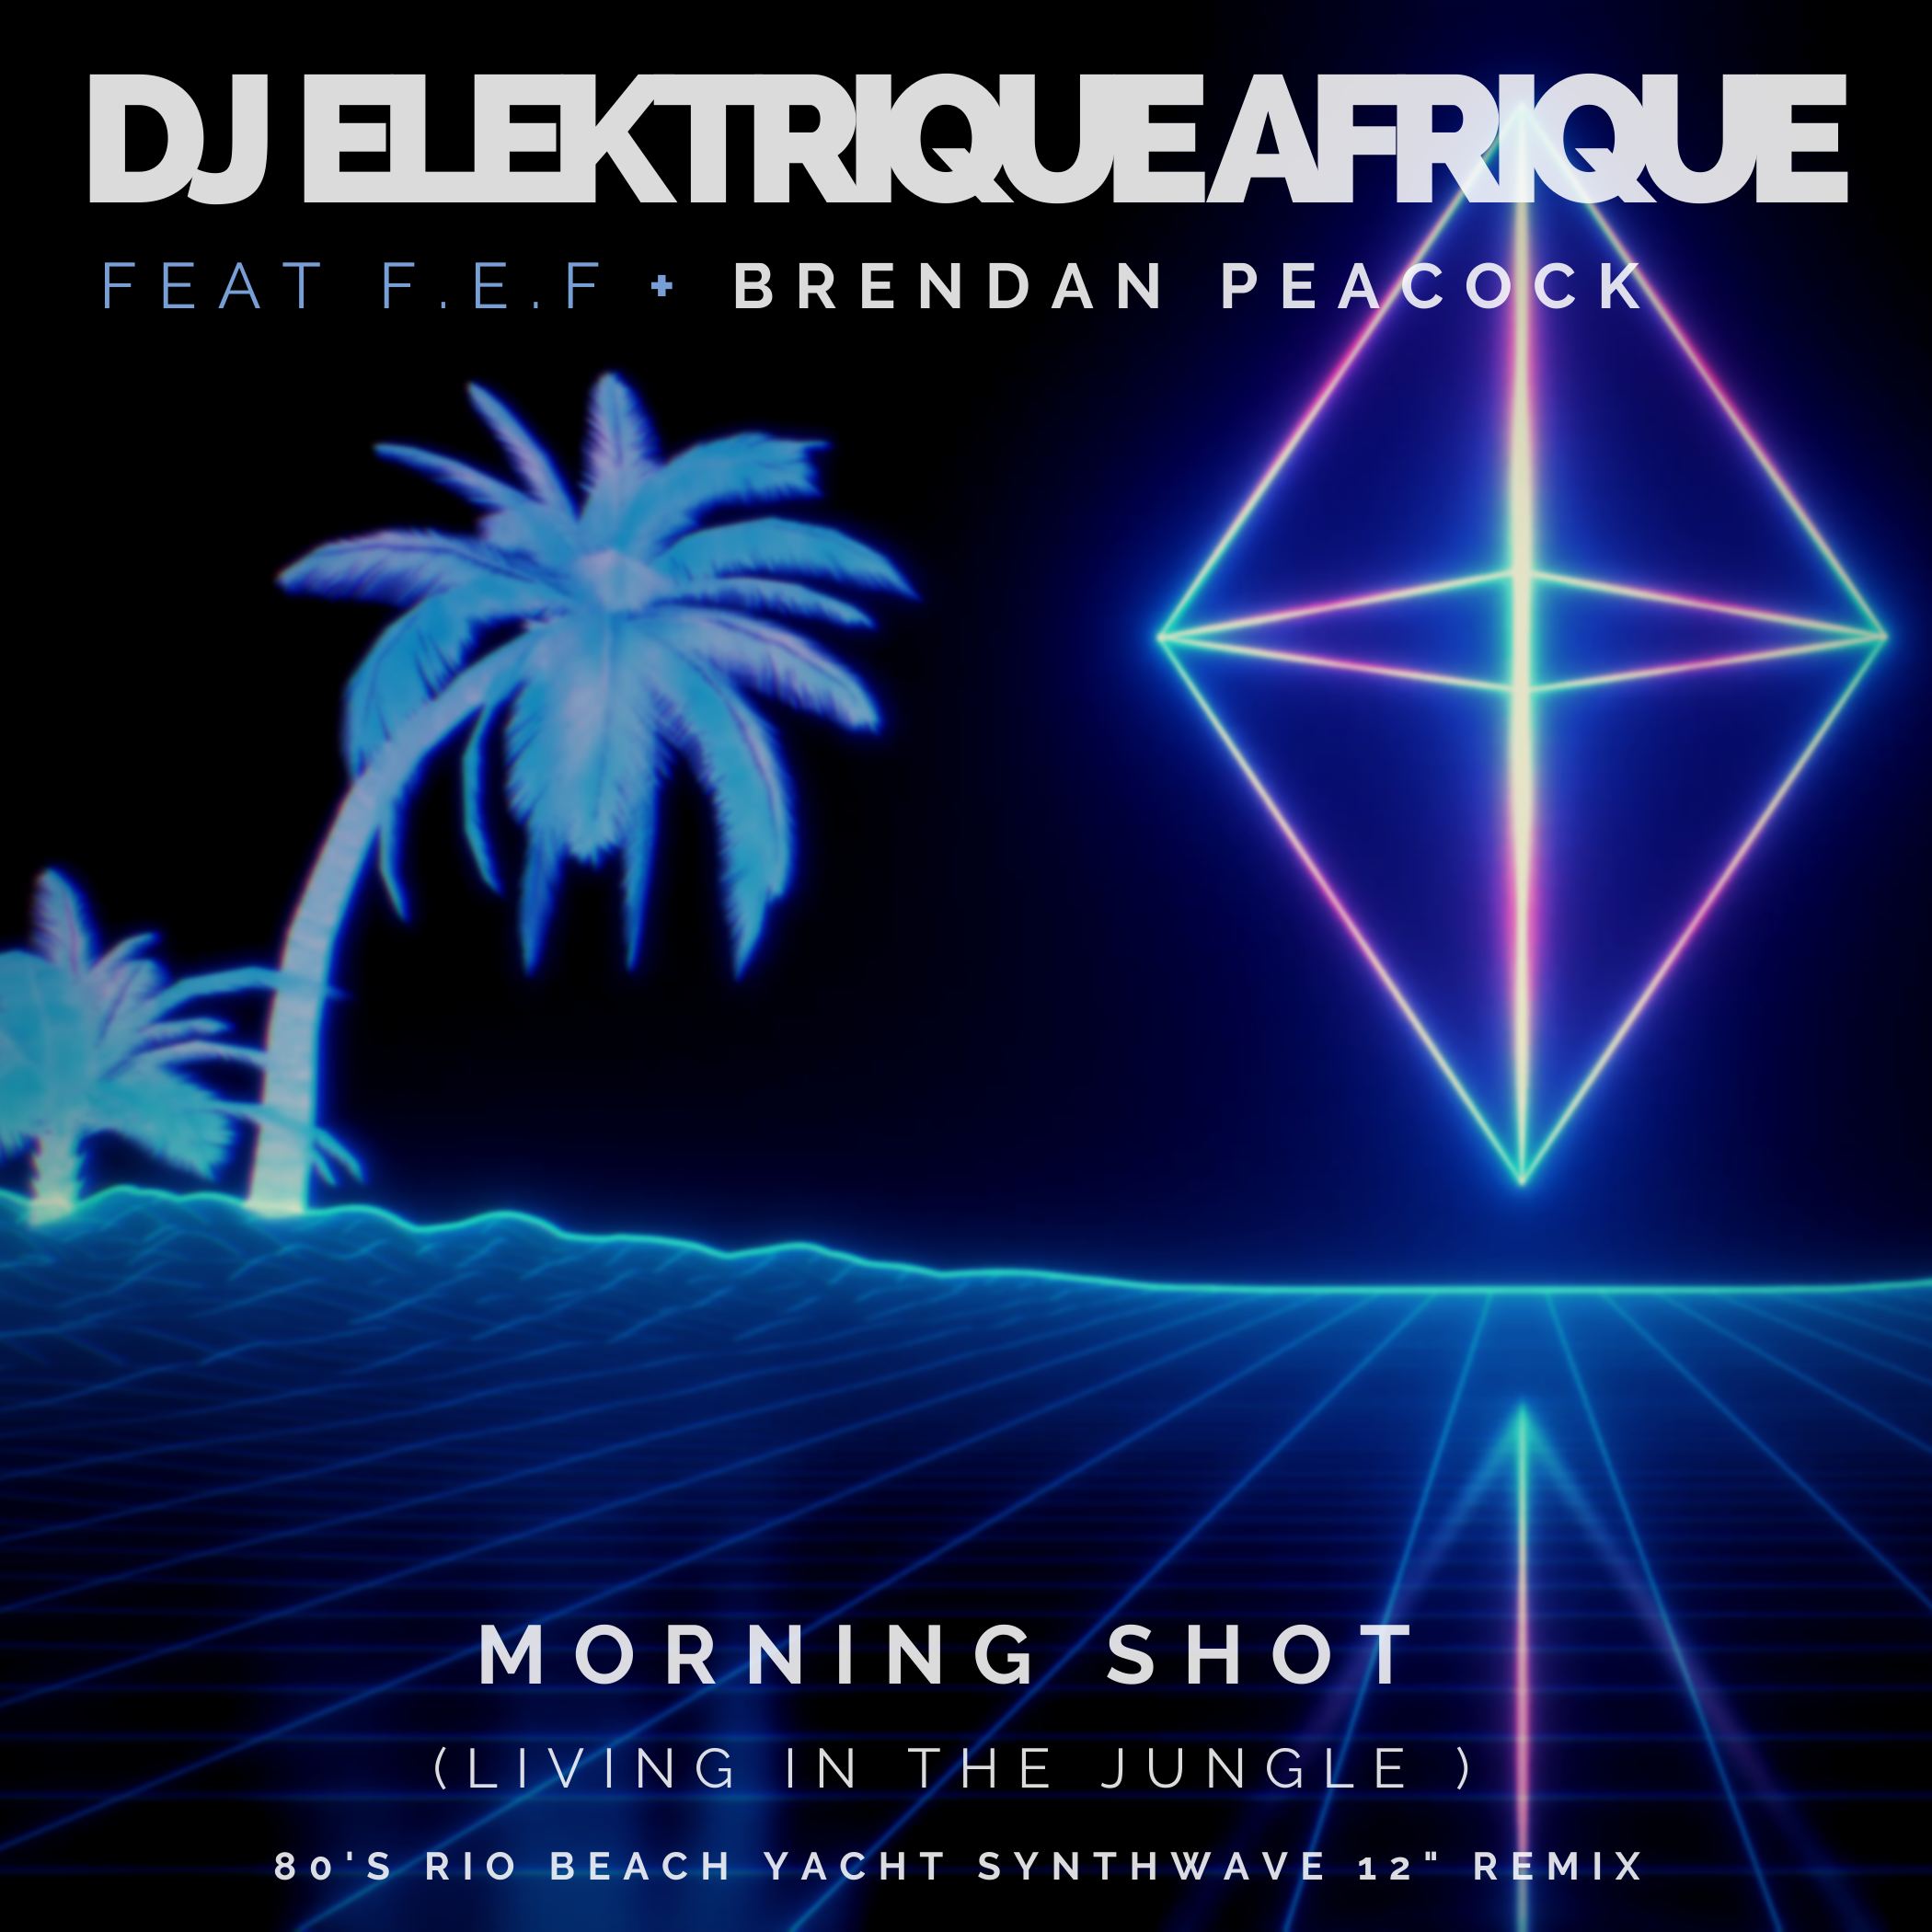 DJ Elektrique Afrique new single  ‘Morning Shot Living in the Jungle’ is being used as the intro soundtrack for the Morning Shot Whinedown